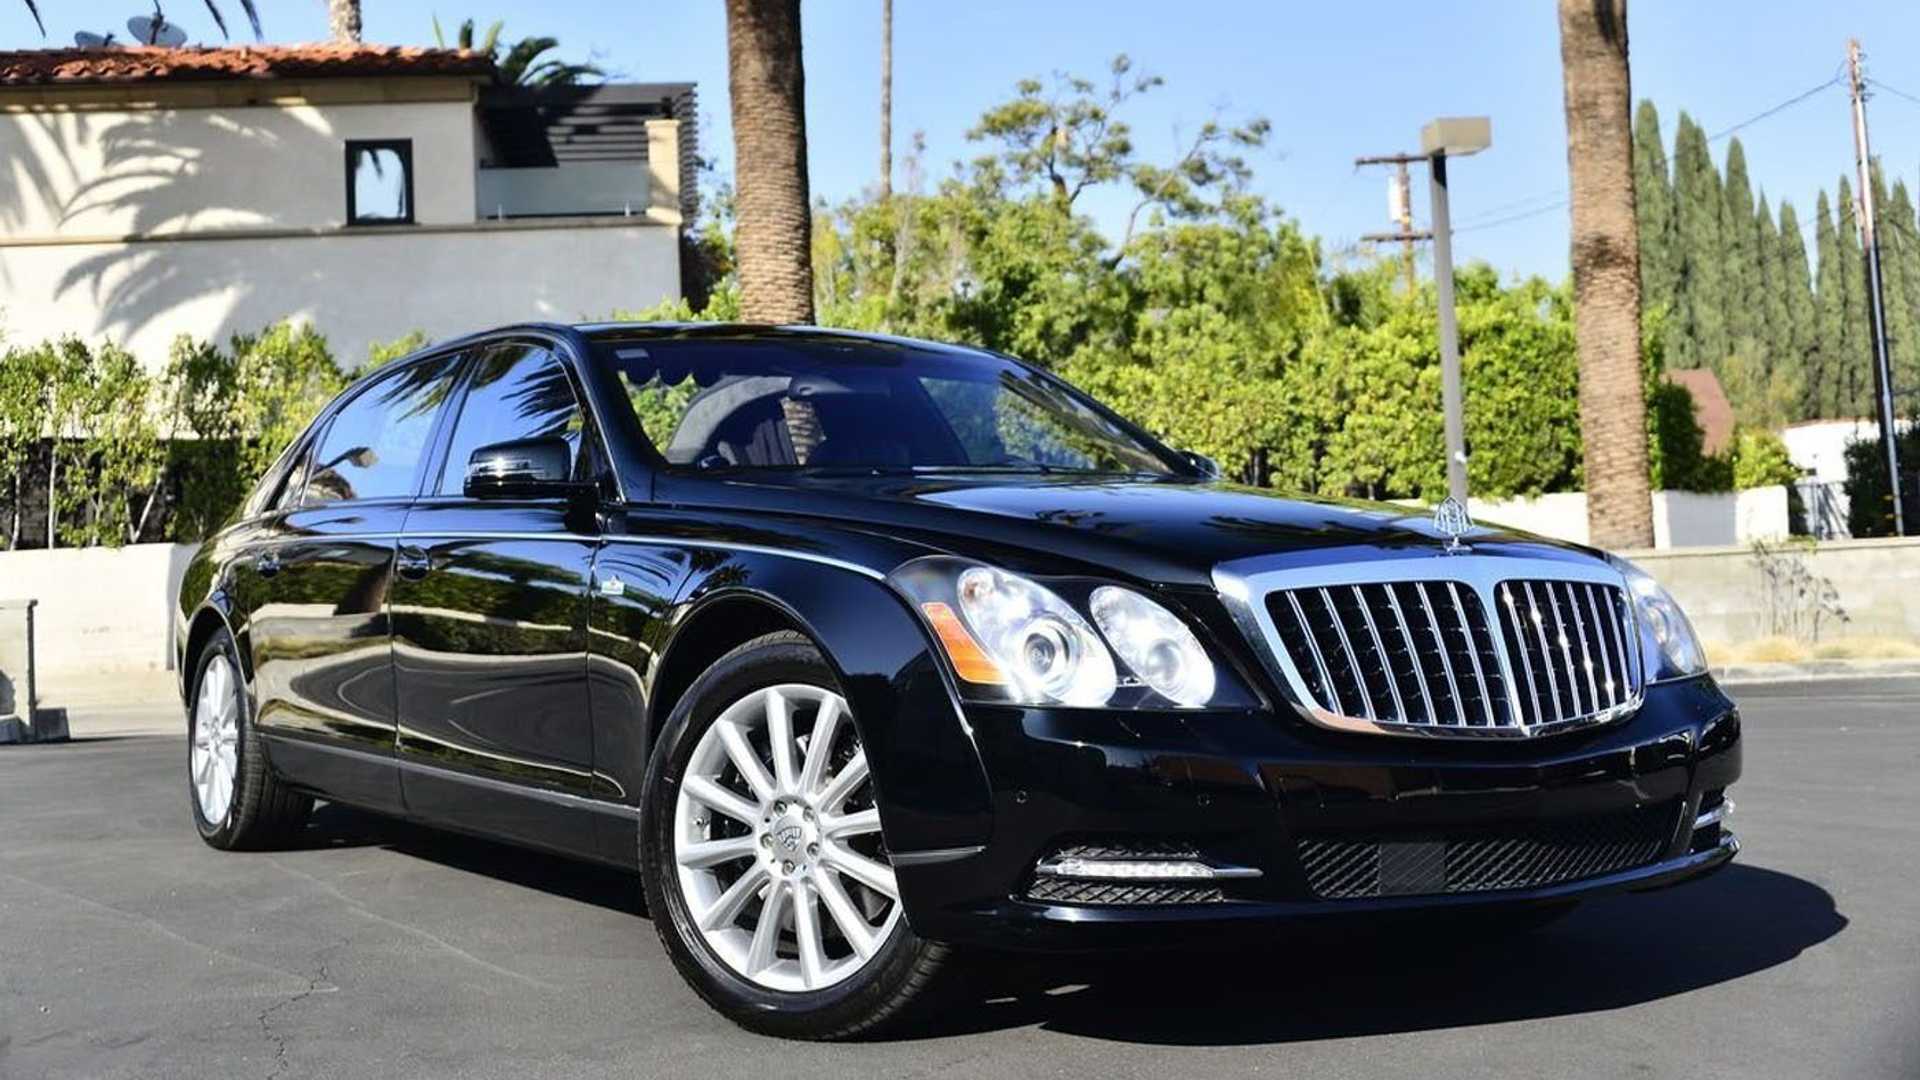 Extremely Rare 2012 Maybach Landaulet 62S For Sale